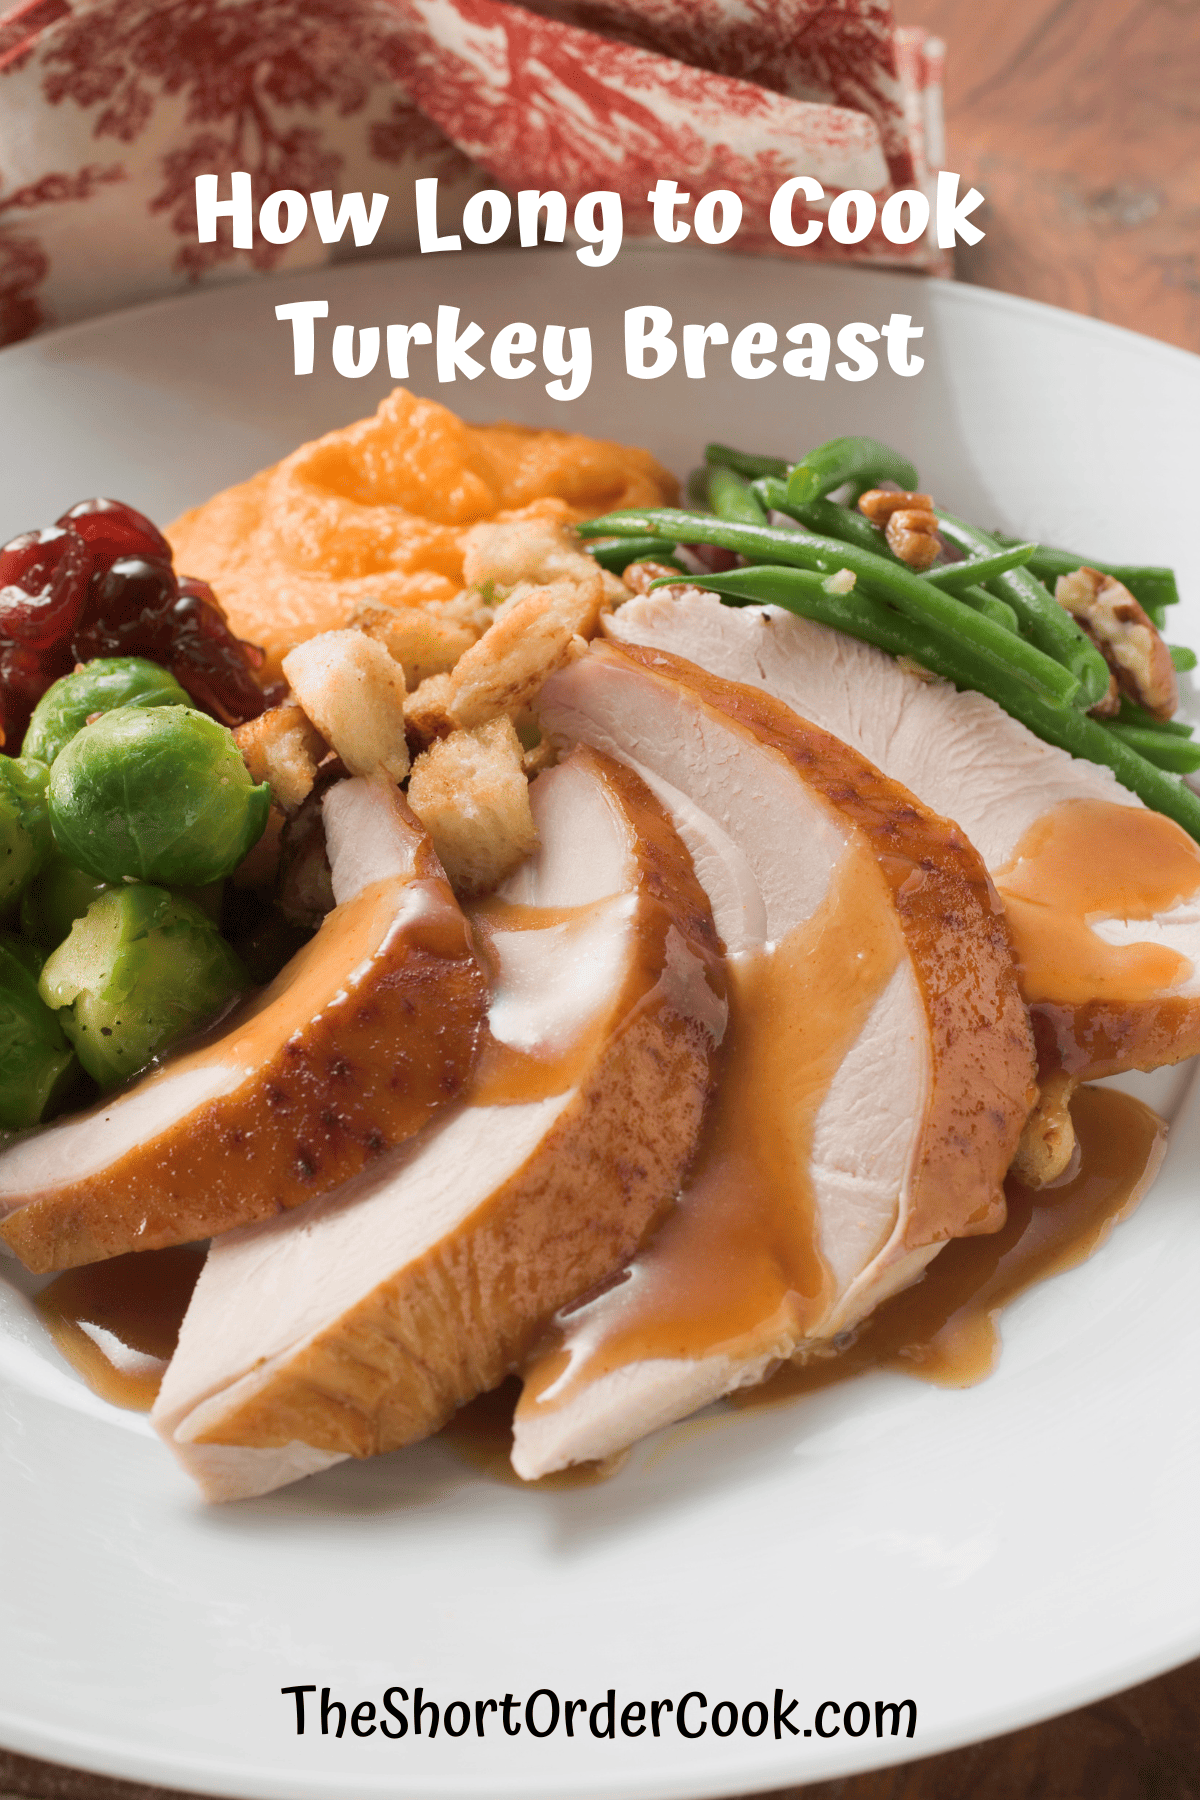 Sliced roasted boneless turkey breast plated with Thanksgiving sides of brussels sprouts and mashed sweet potatoes.